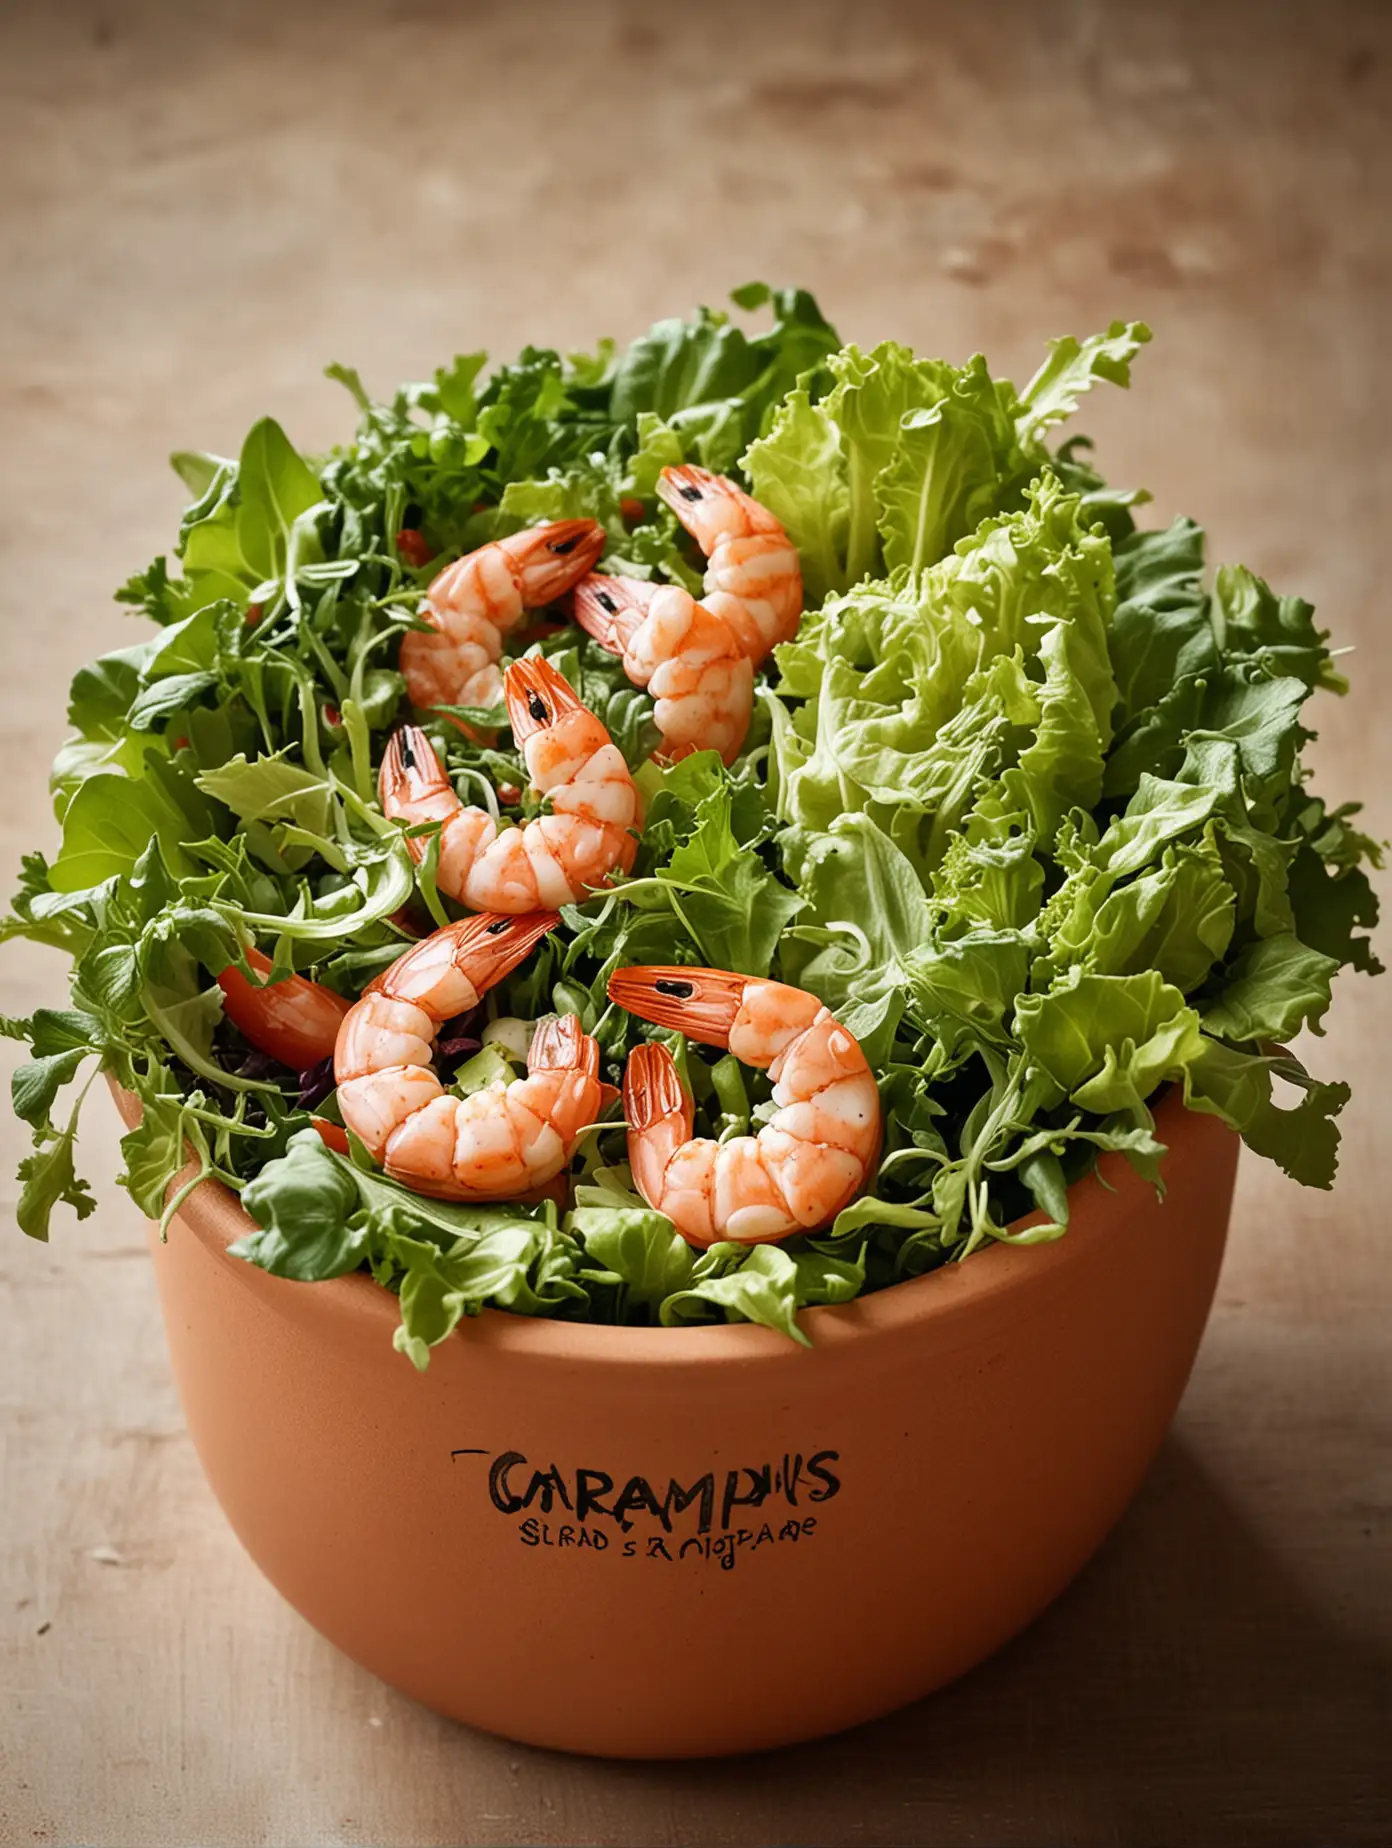 /imagine a bowl of salad in the shape of a plant terracota pot and inside you can see a delicious salad with shrimps on top and a label in the pot with the name of the salad looking like a plant label